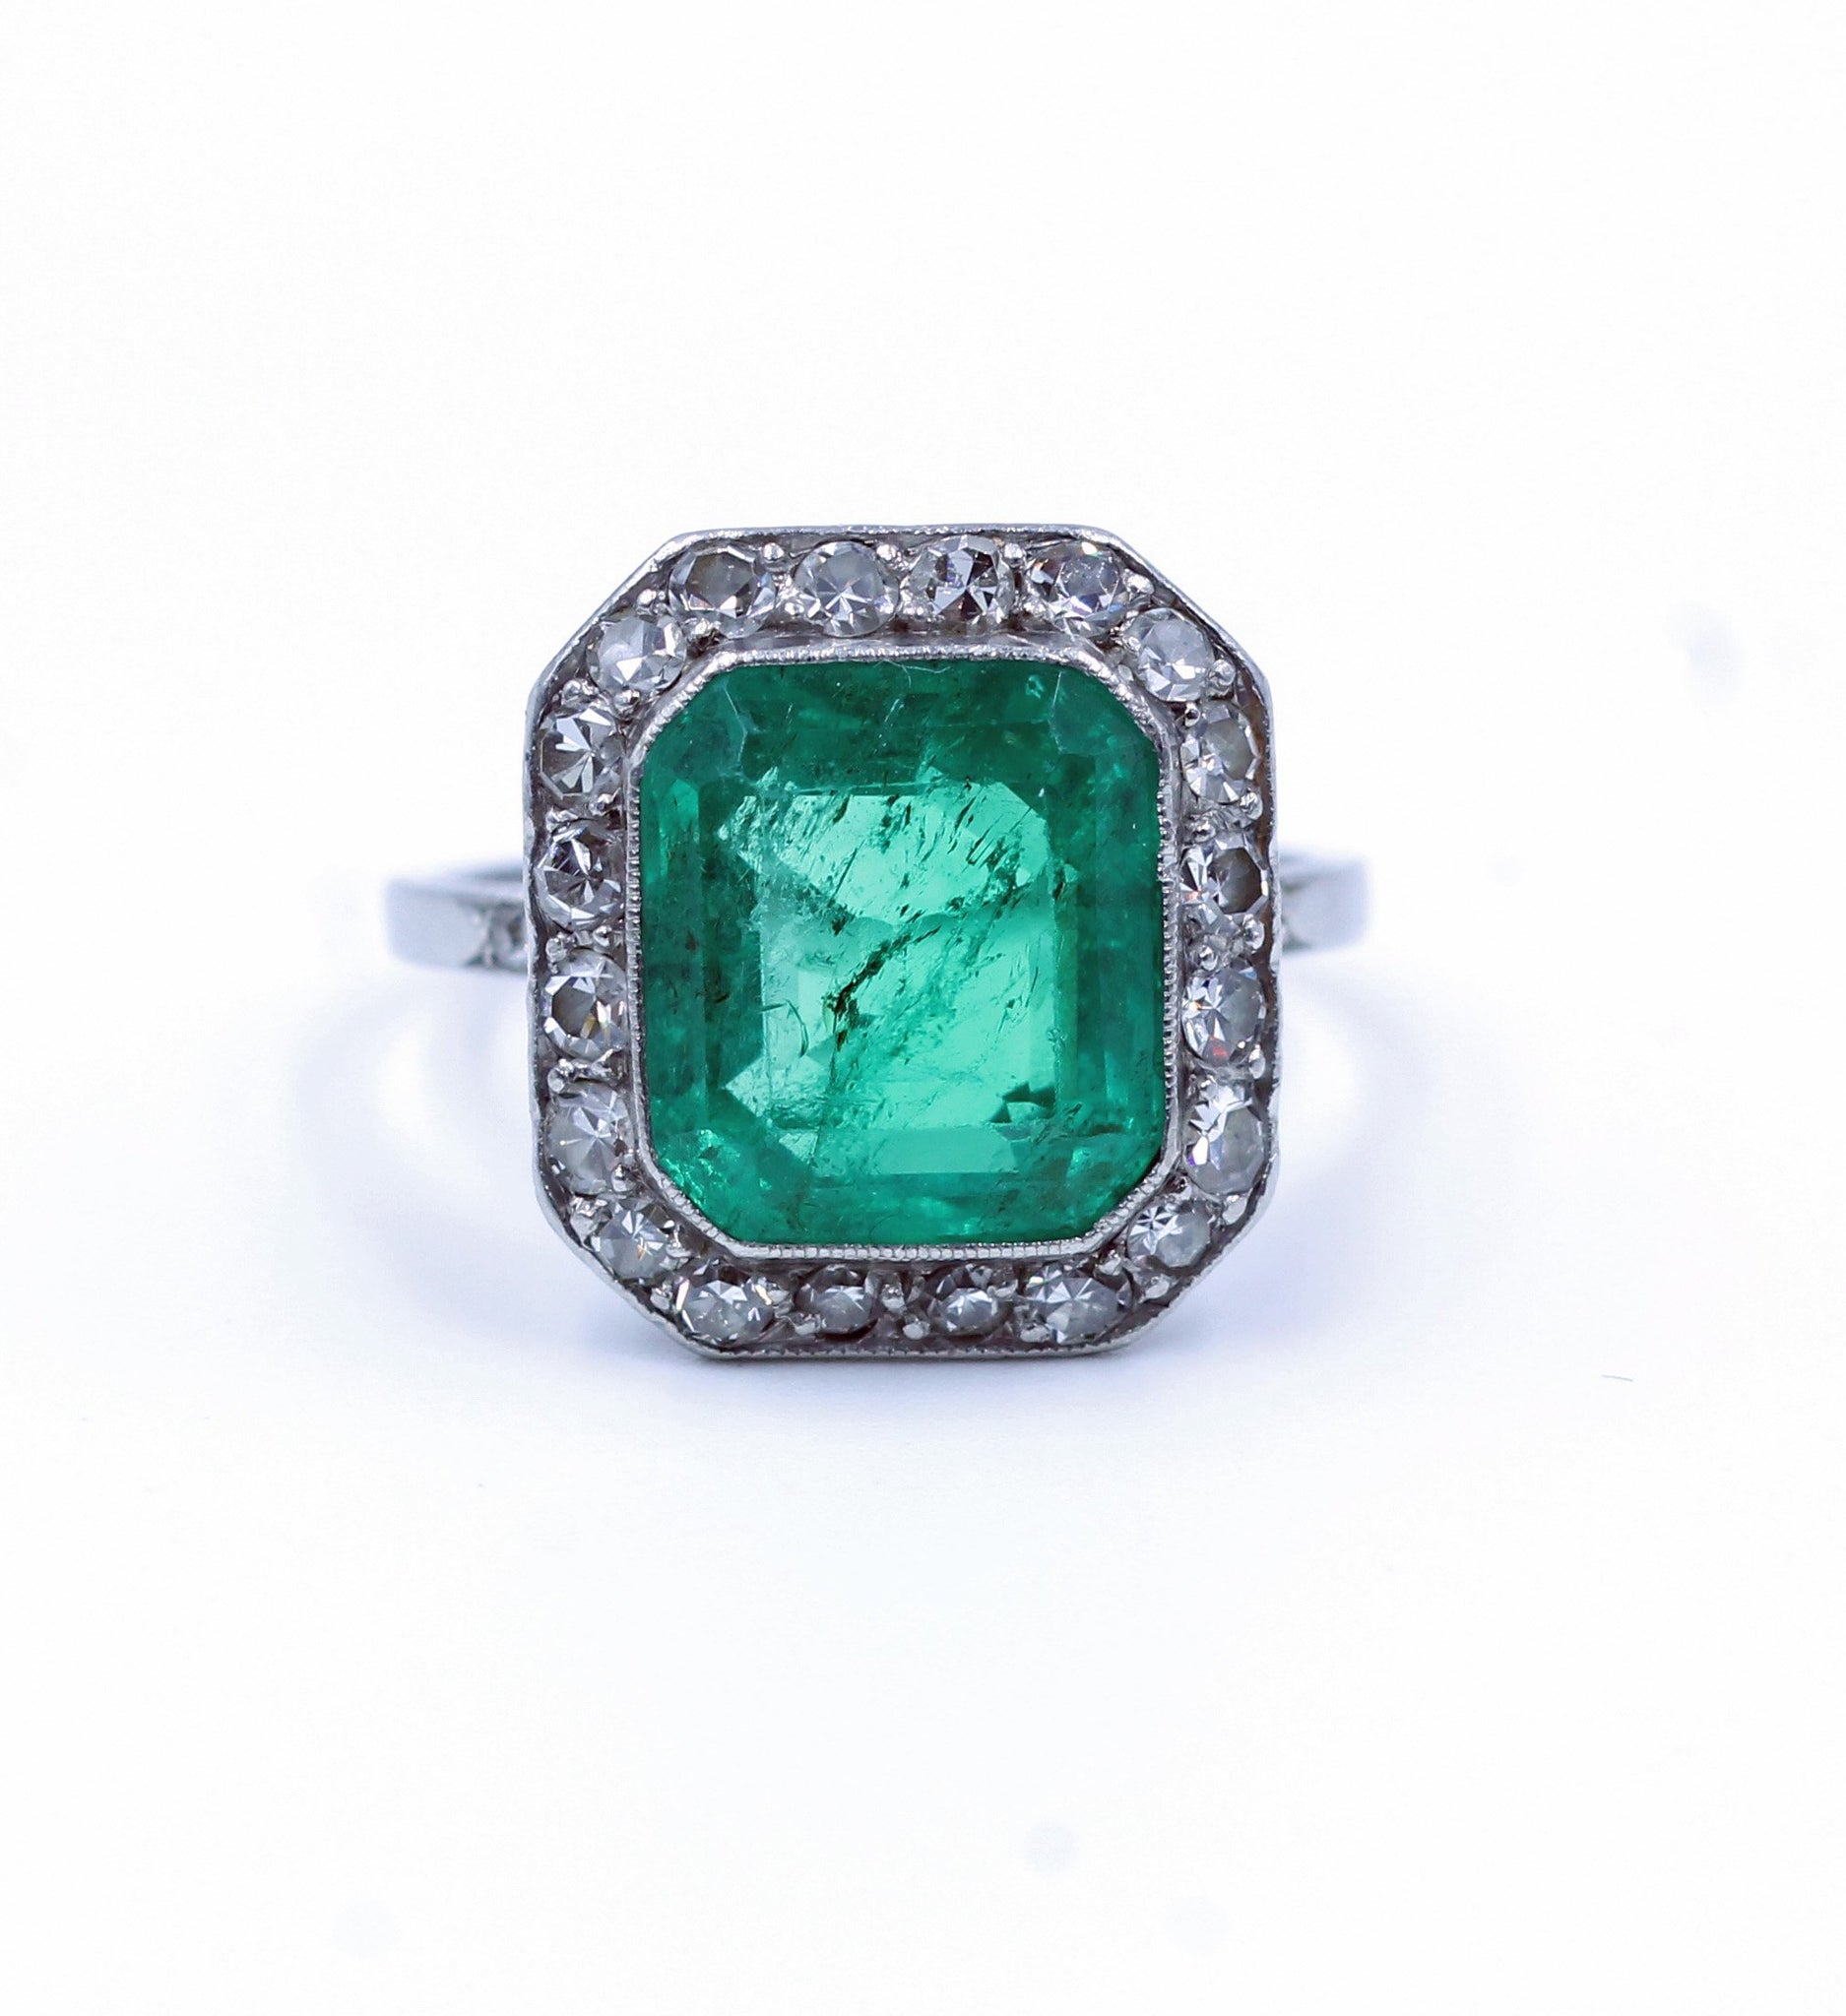 Vintage Emerald and Diamond Ring, SOLD